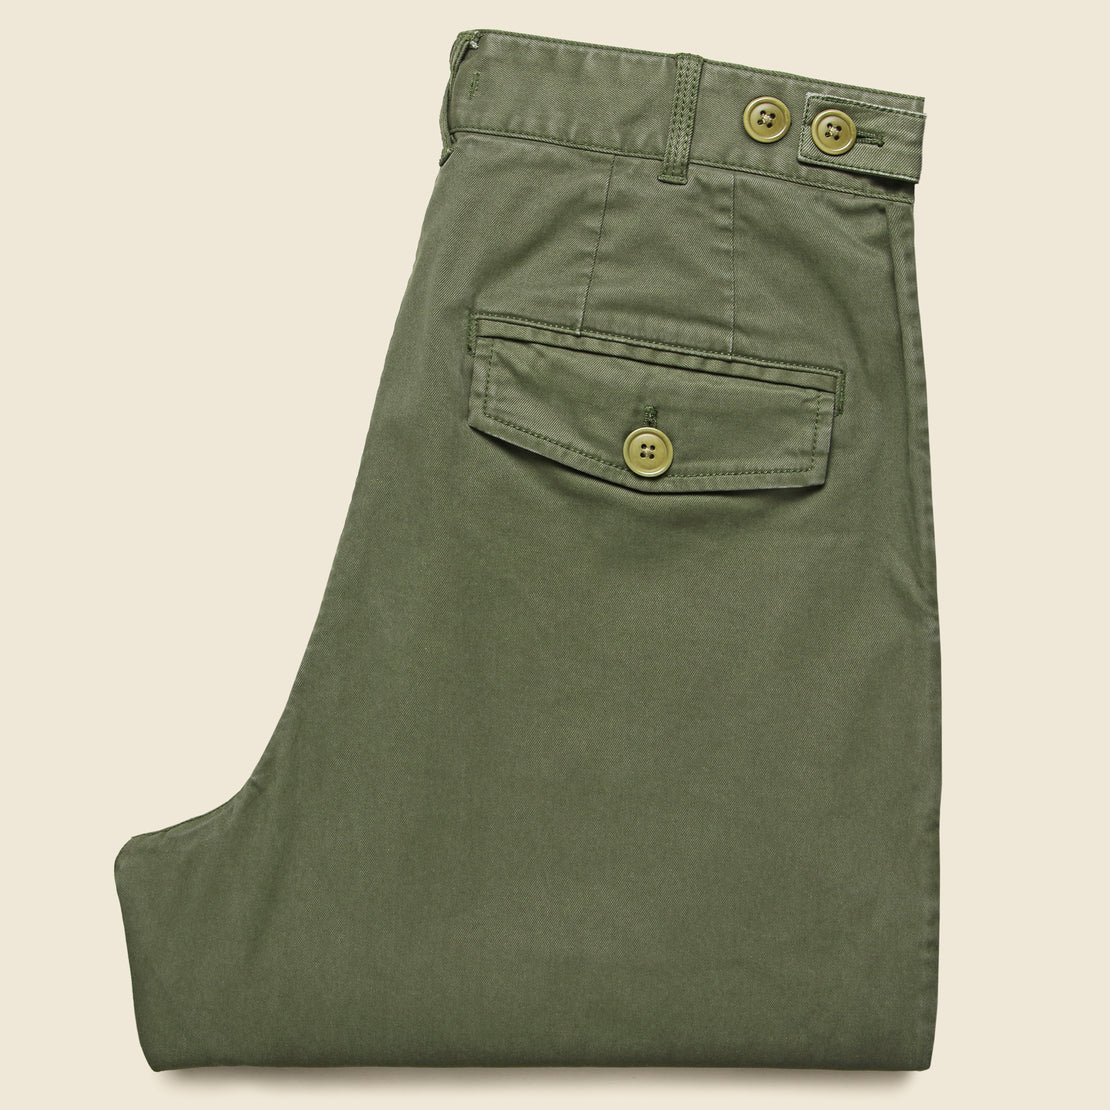 Mill Chino - Military Olive